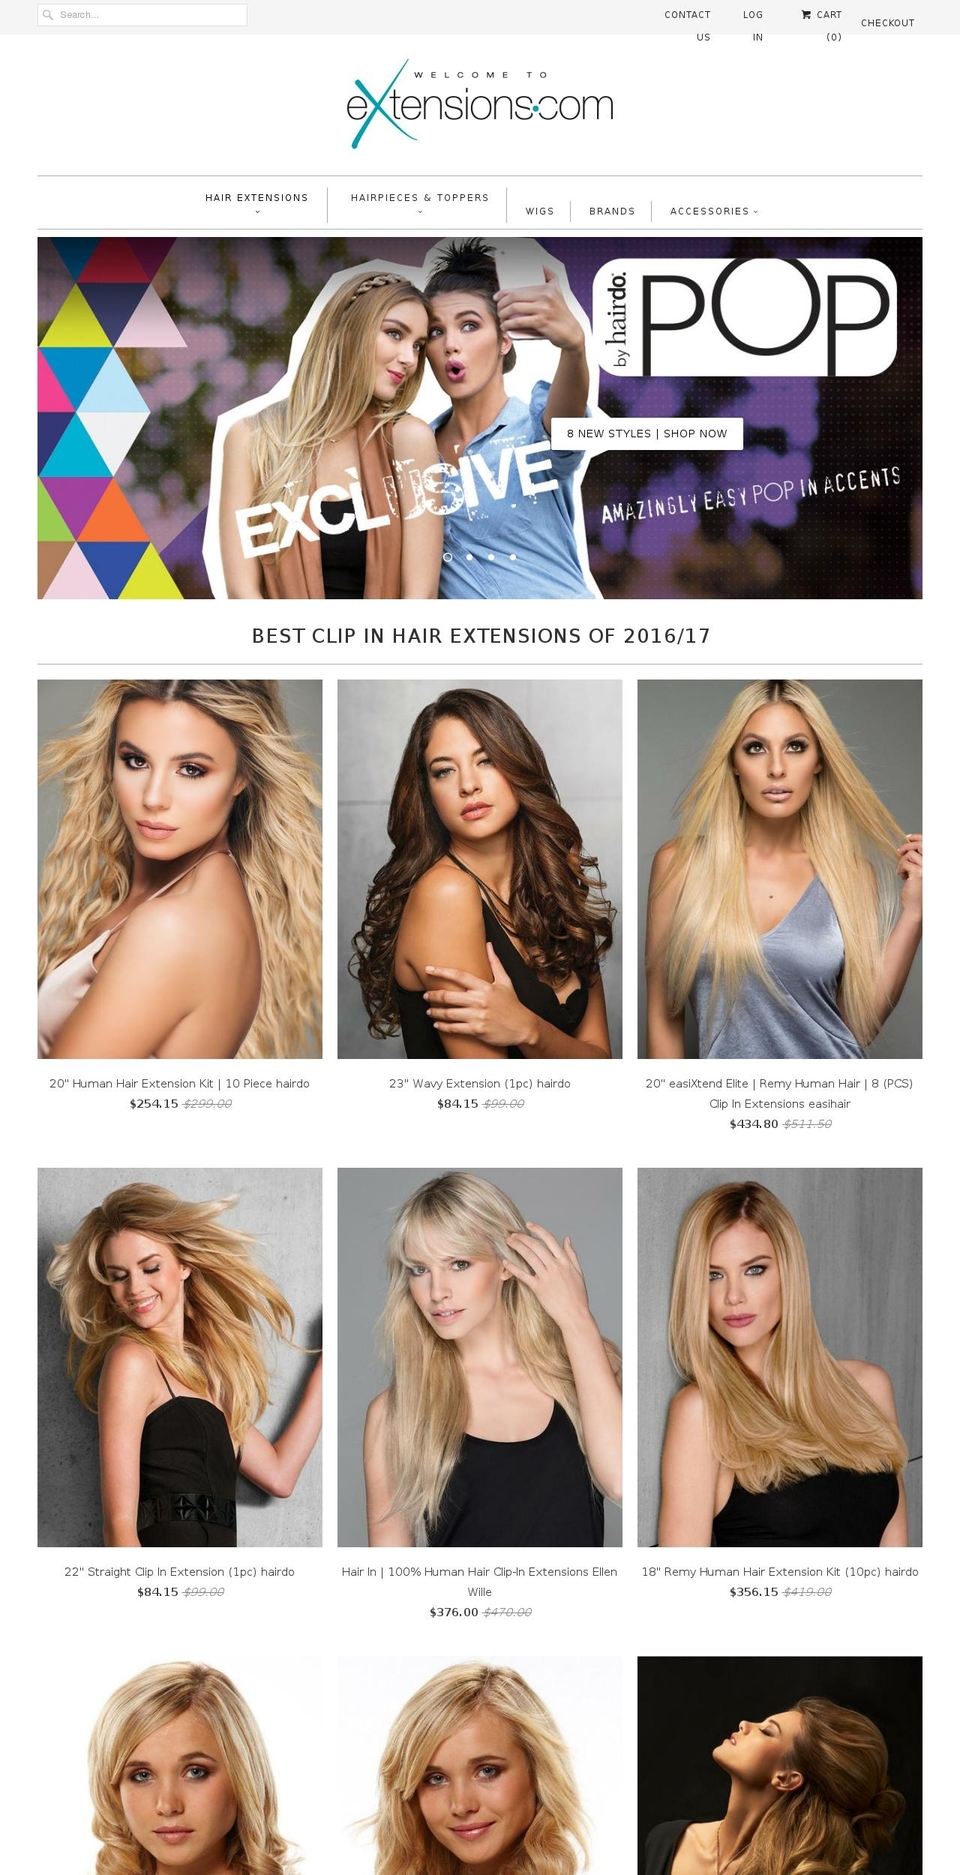 Responsive Shopify theme site example hairextensions.com